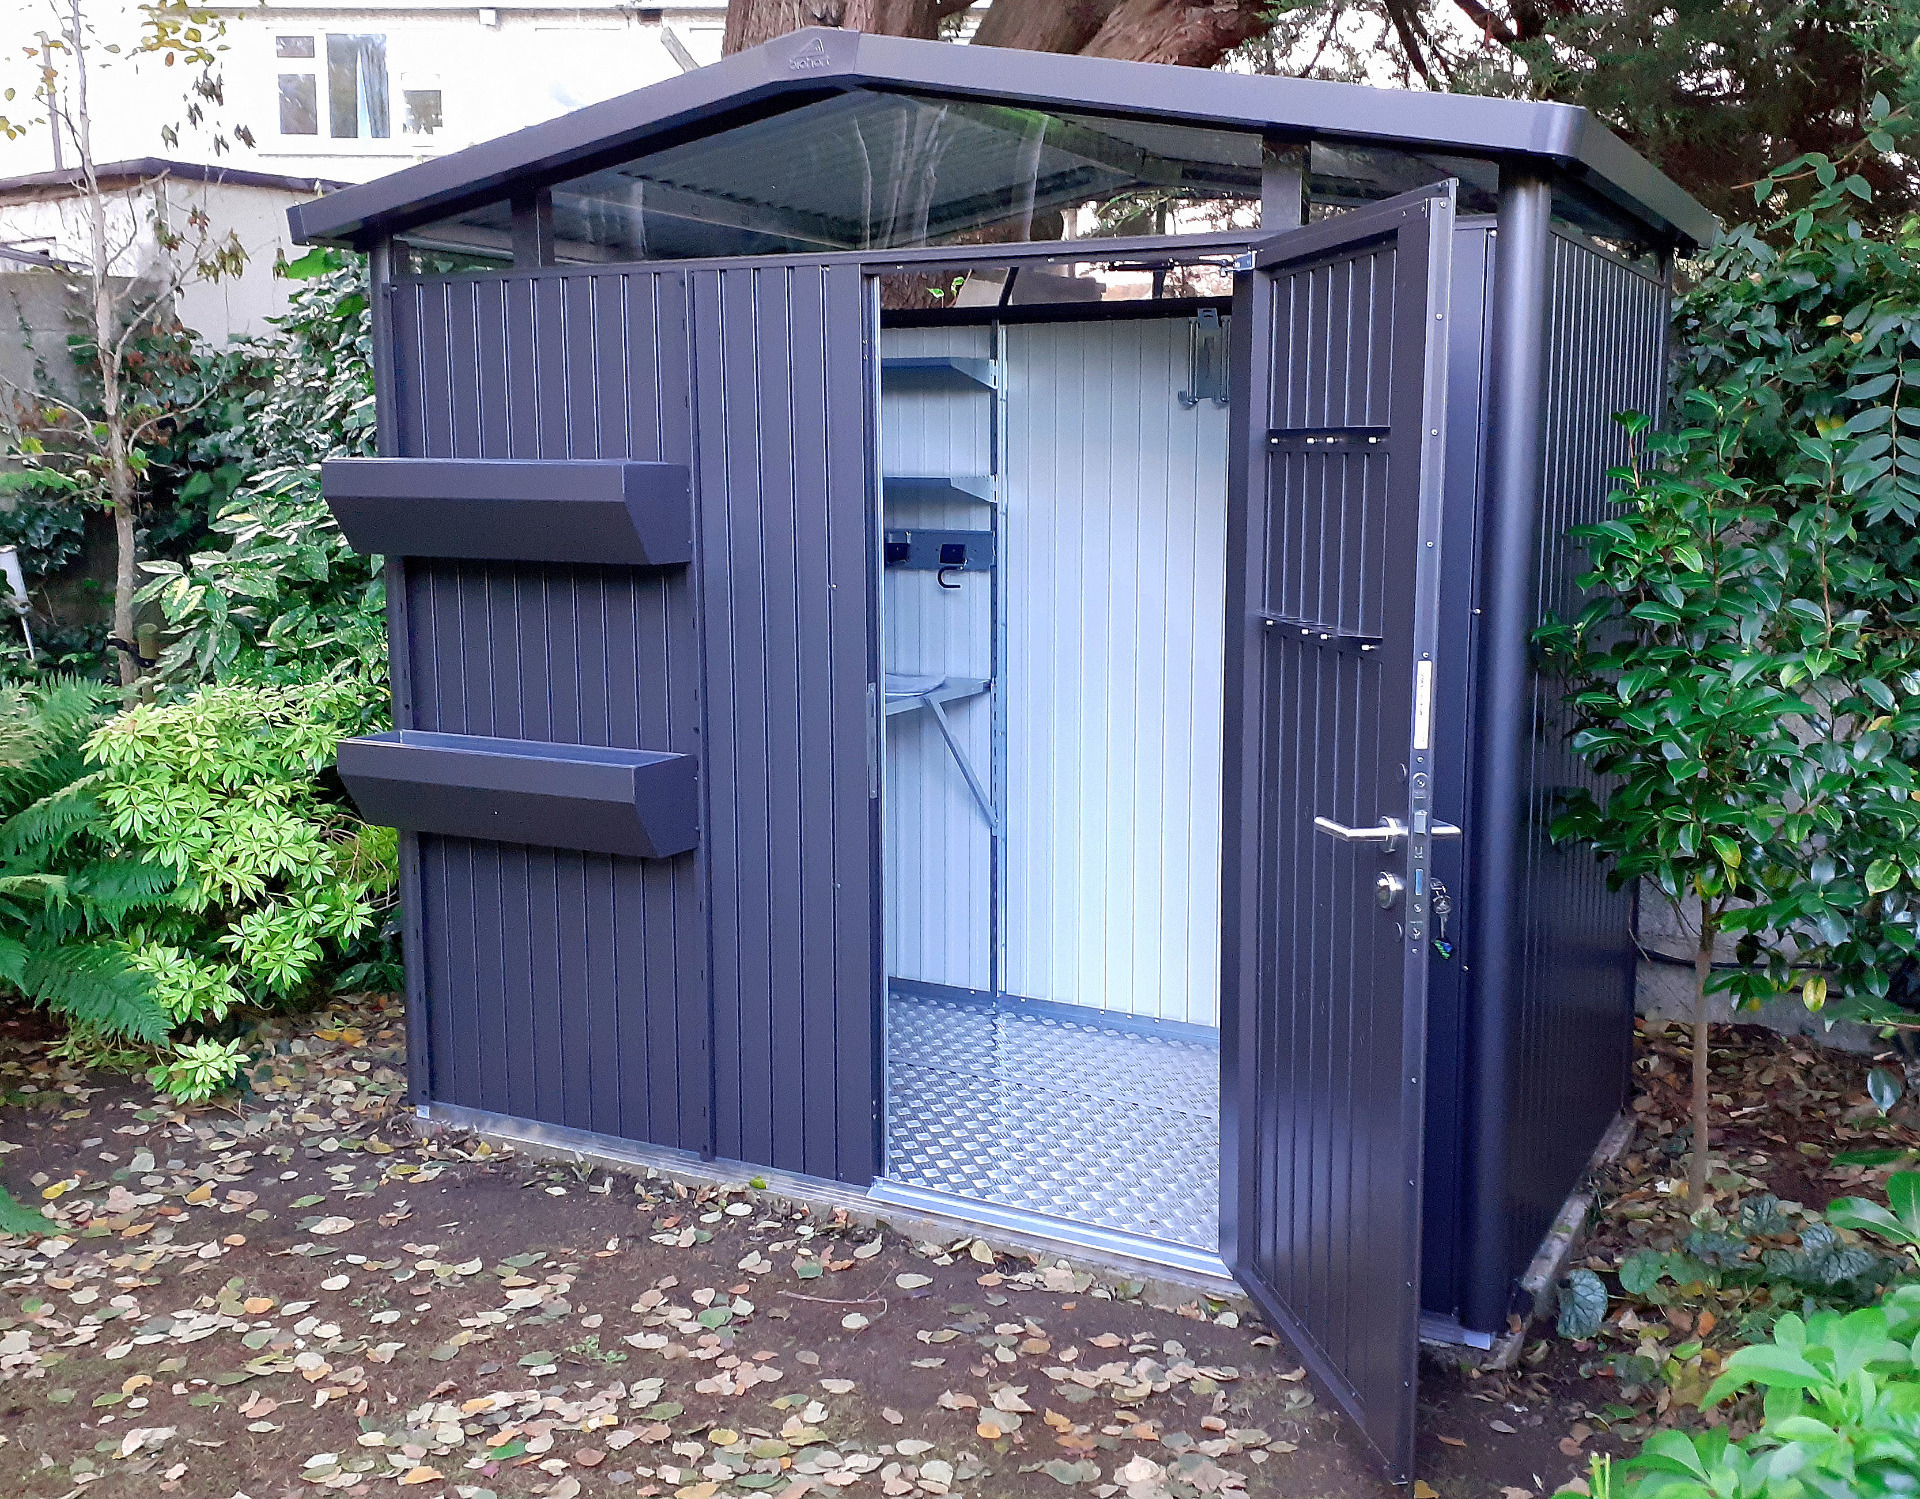 The Biohort Panorama P1 Garden Shed in metallic dark grey with optional accessories including aluminium floor panels, FloraBord Planter, Folding table, LED light |`Supplied + Fitted in Rathfarnham, Dublin 14by Owen Chubb Tel 087 - 2306 128 | #1 for Biohort in Ireland